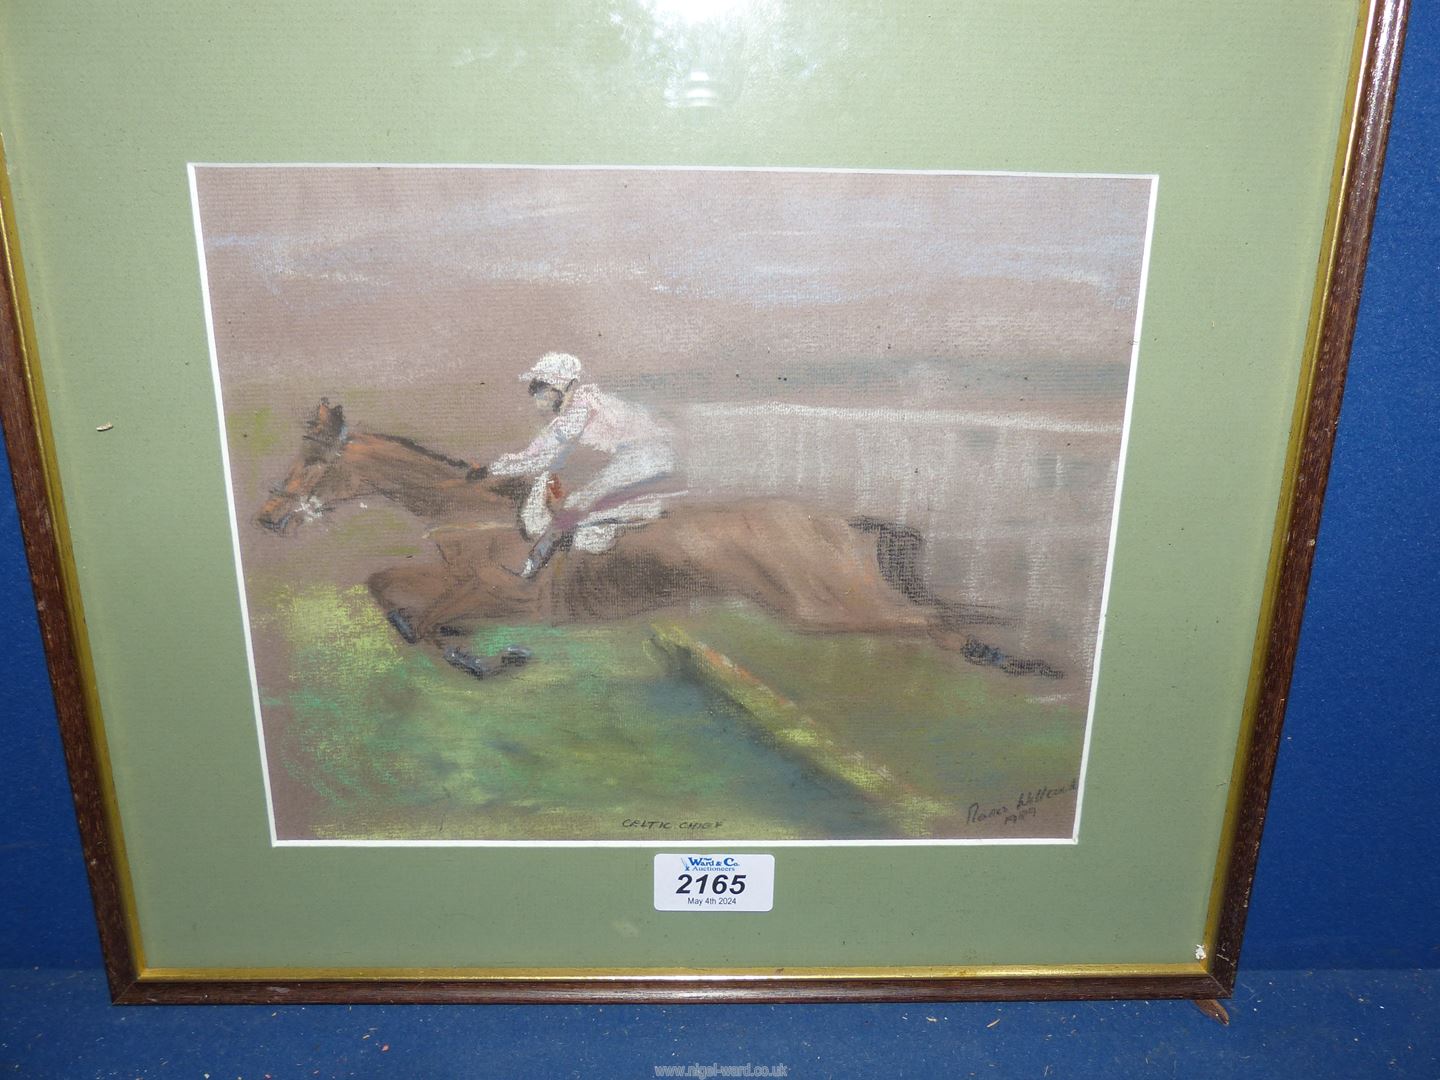 A framed and mounted Pastel picture of a Race Horse titled "Celtic Chief",